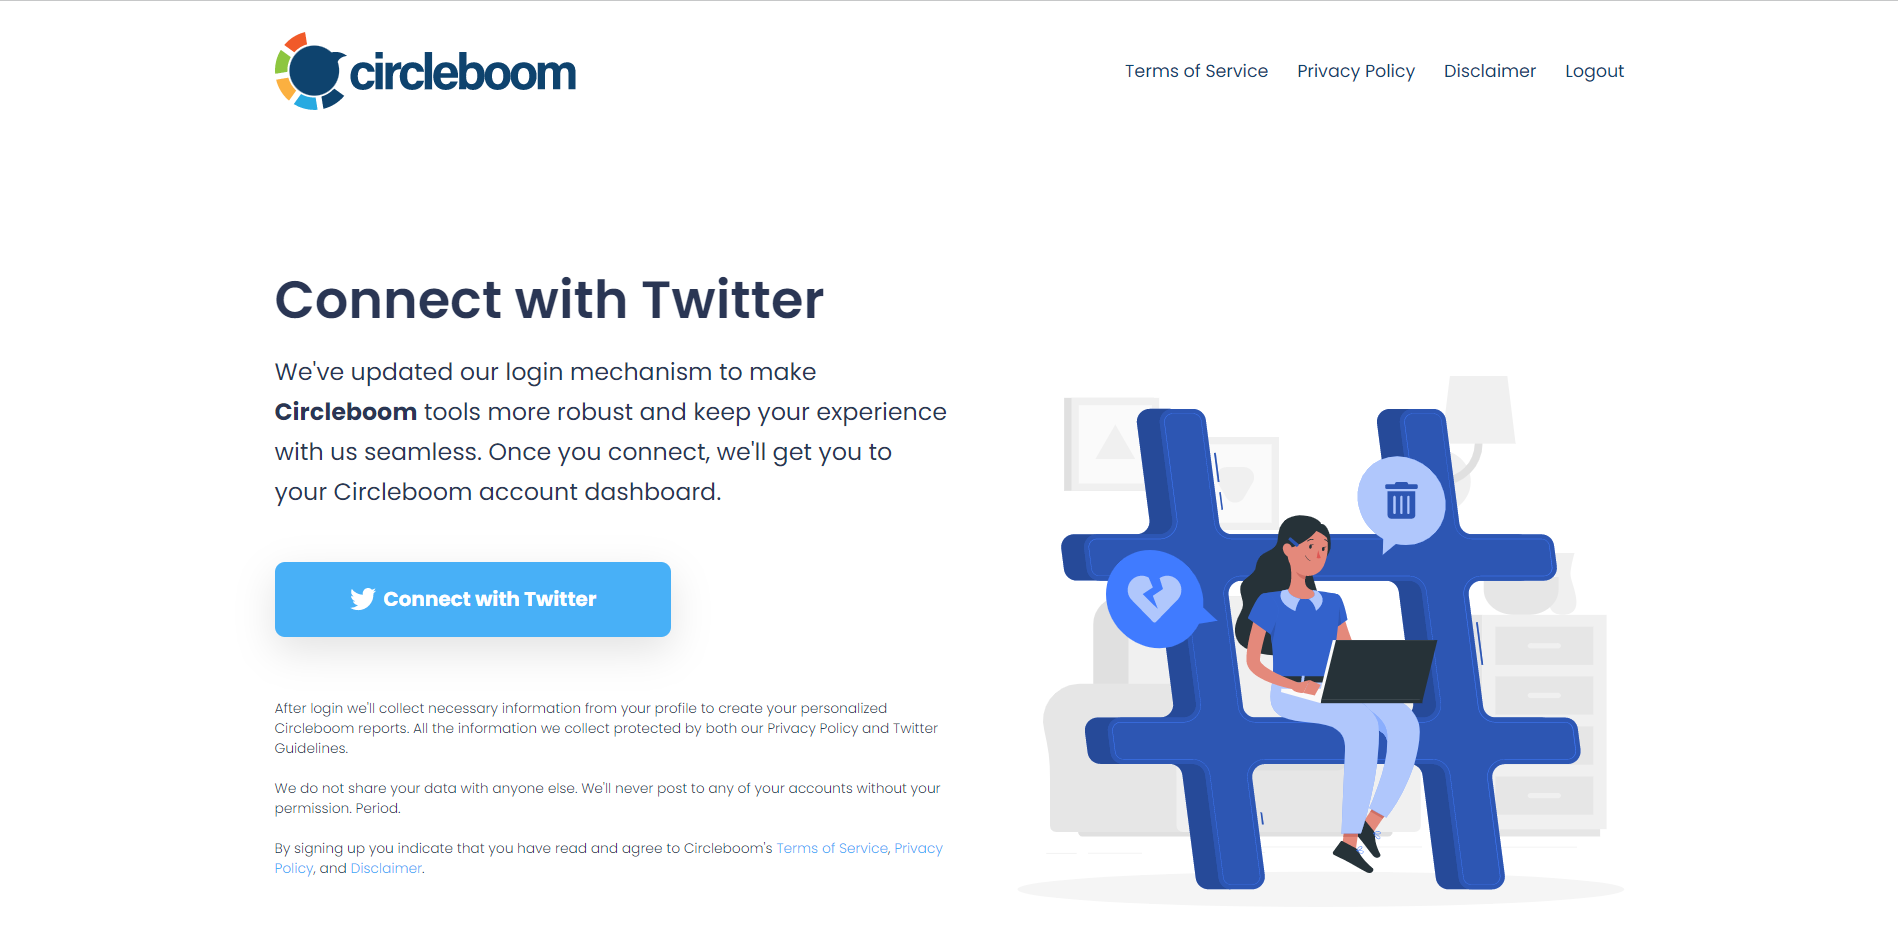 tweet delete by keyword is an easy-peasy process with Circleboom Twitter!